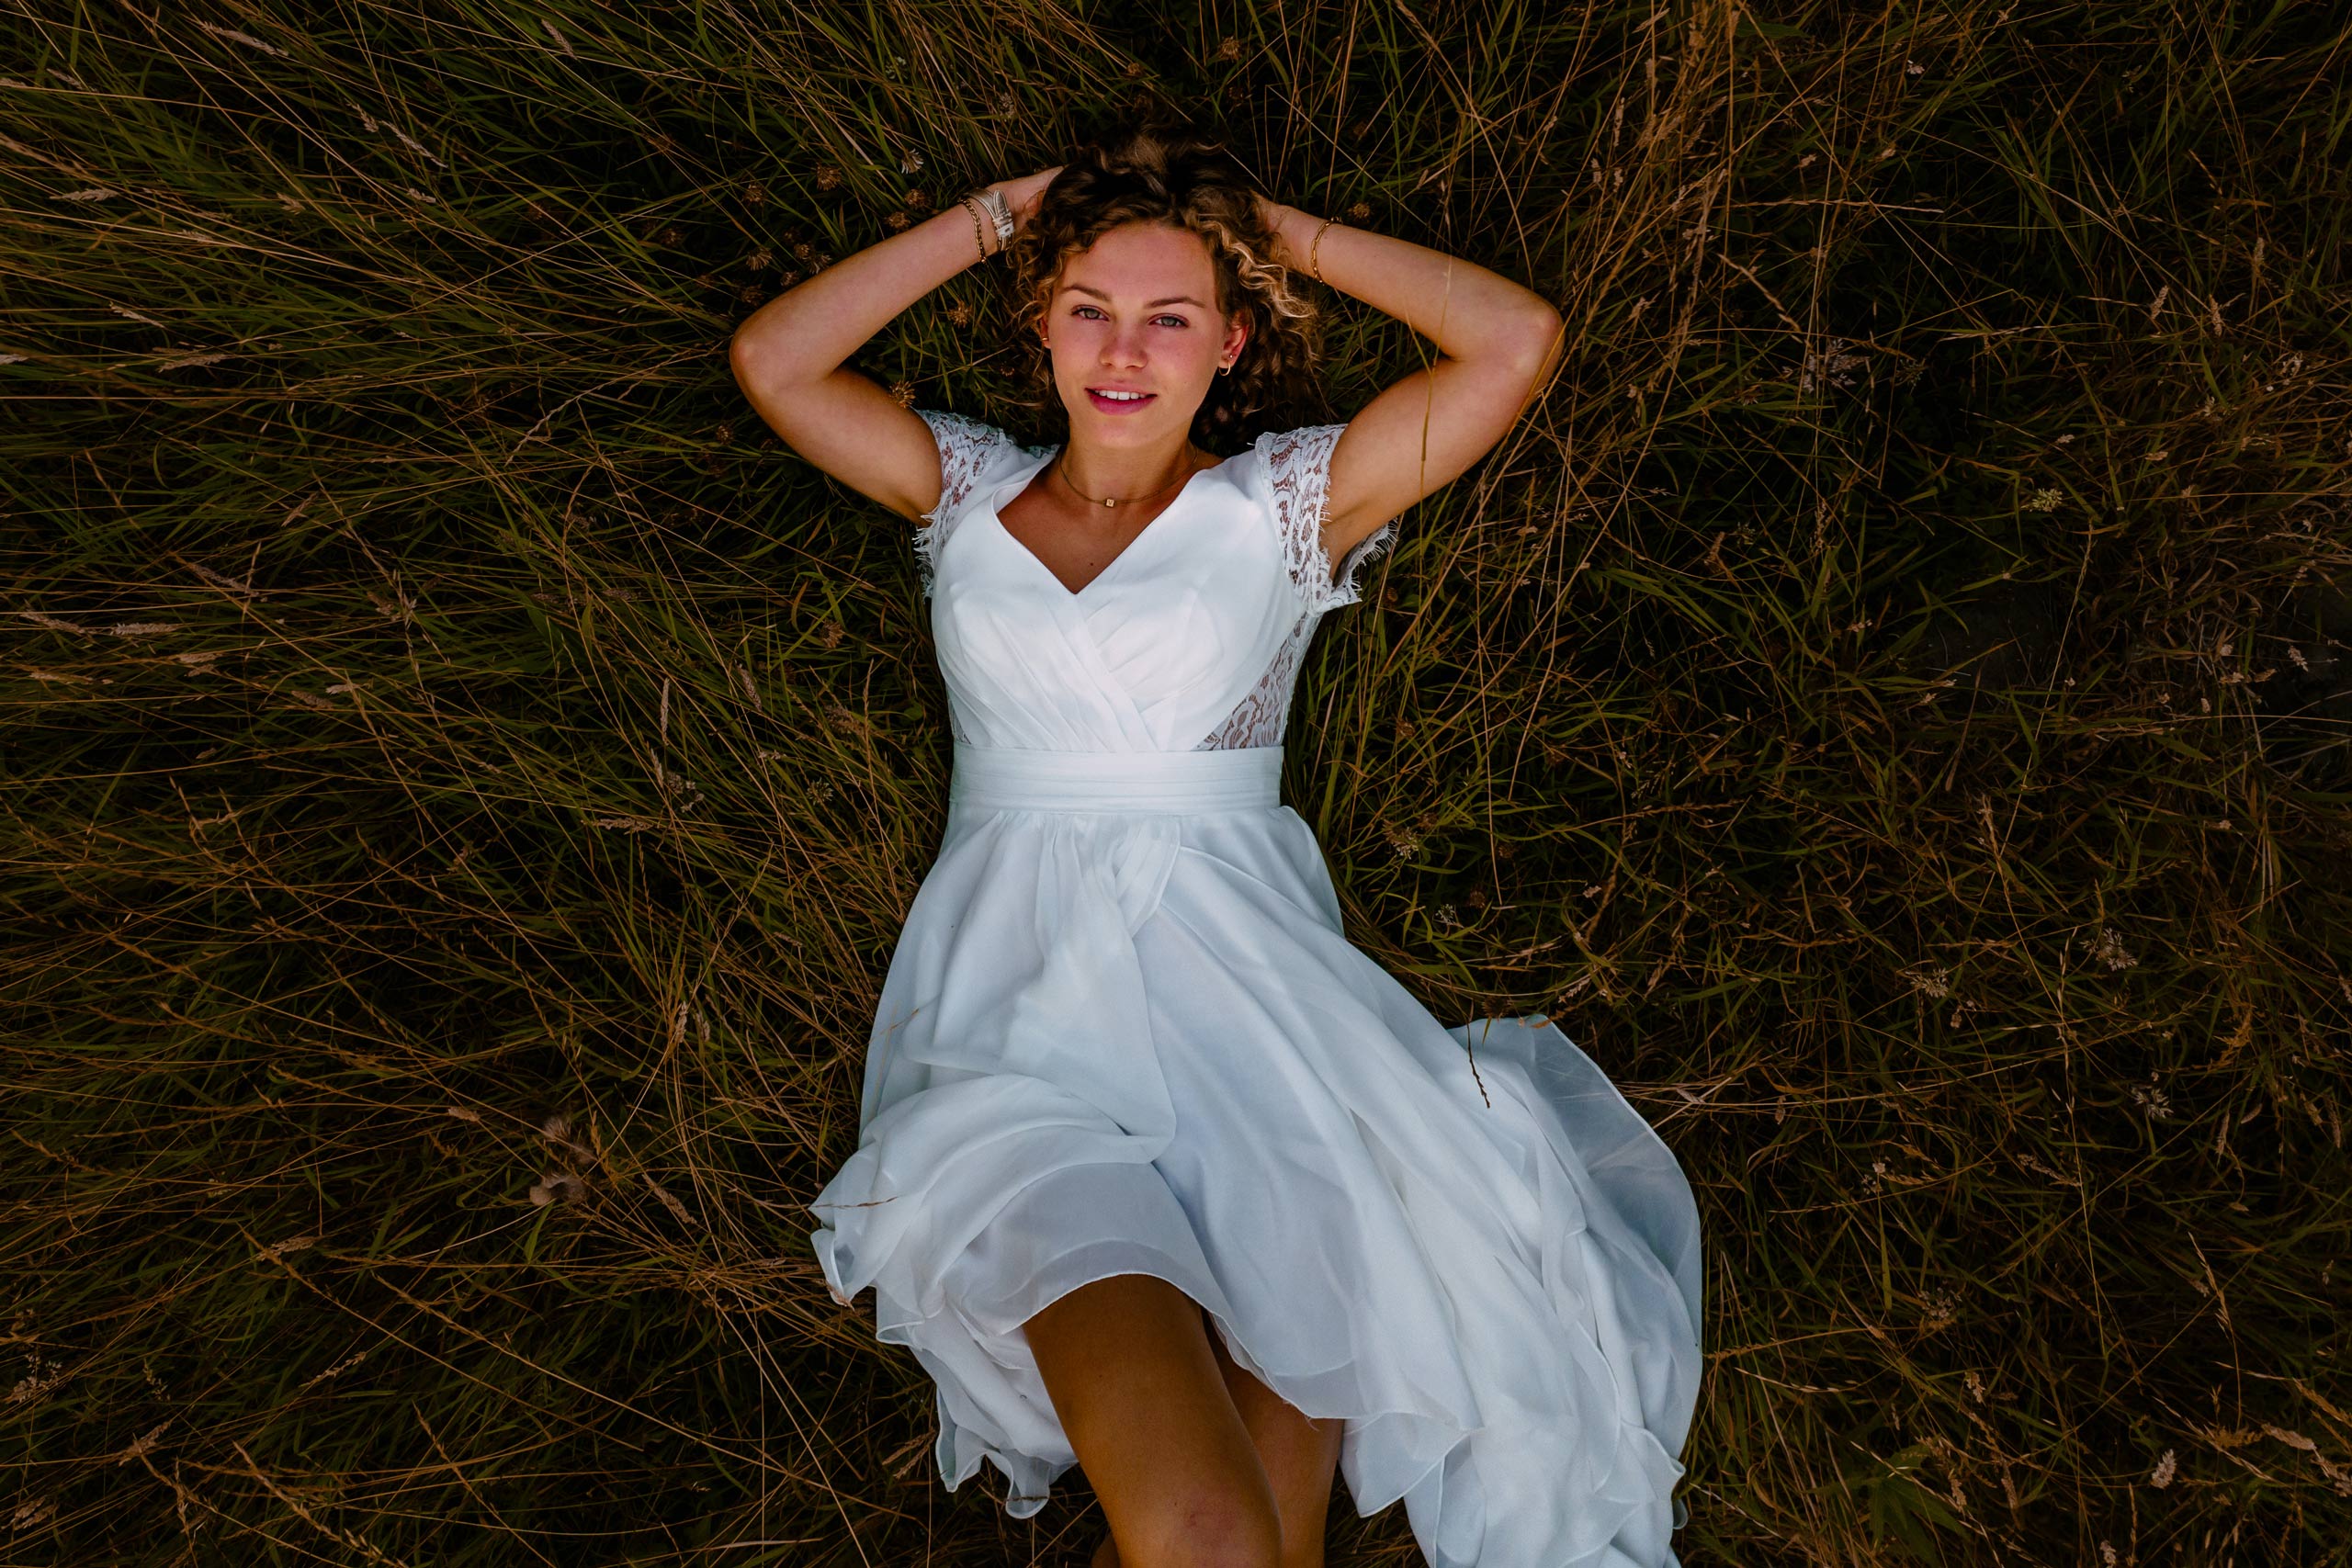 A woman in a white dress relaxing peacefully in the grass.